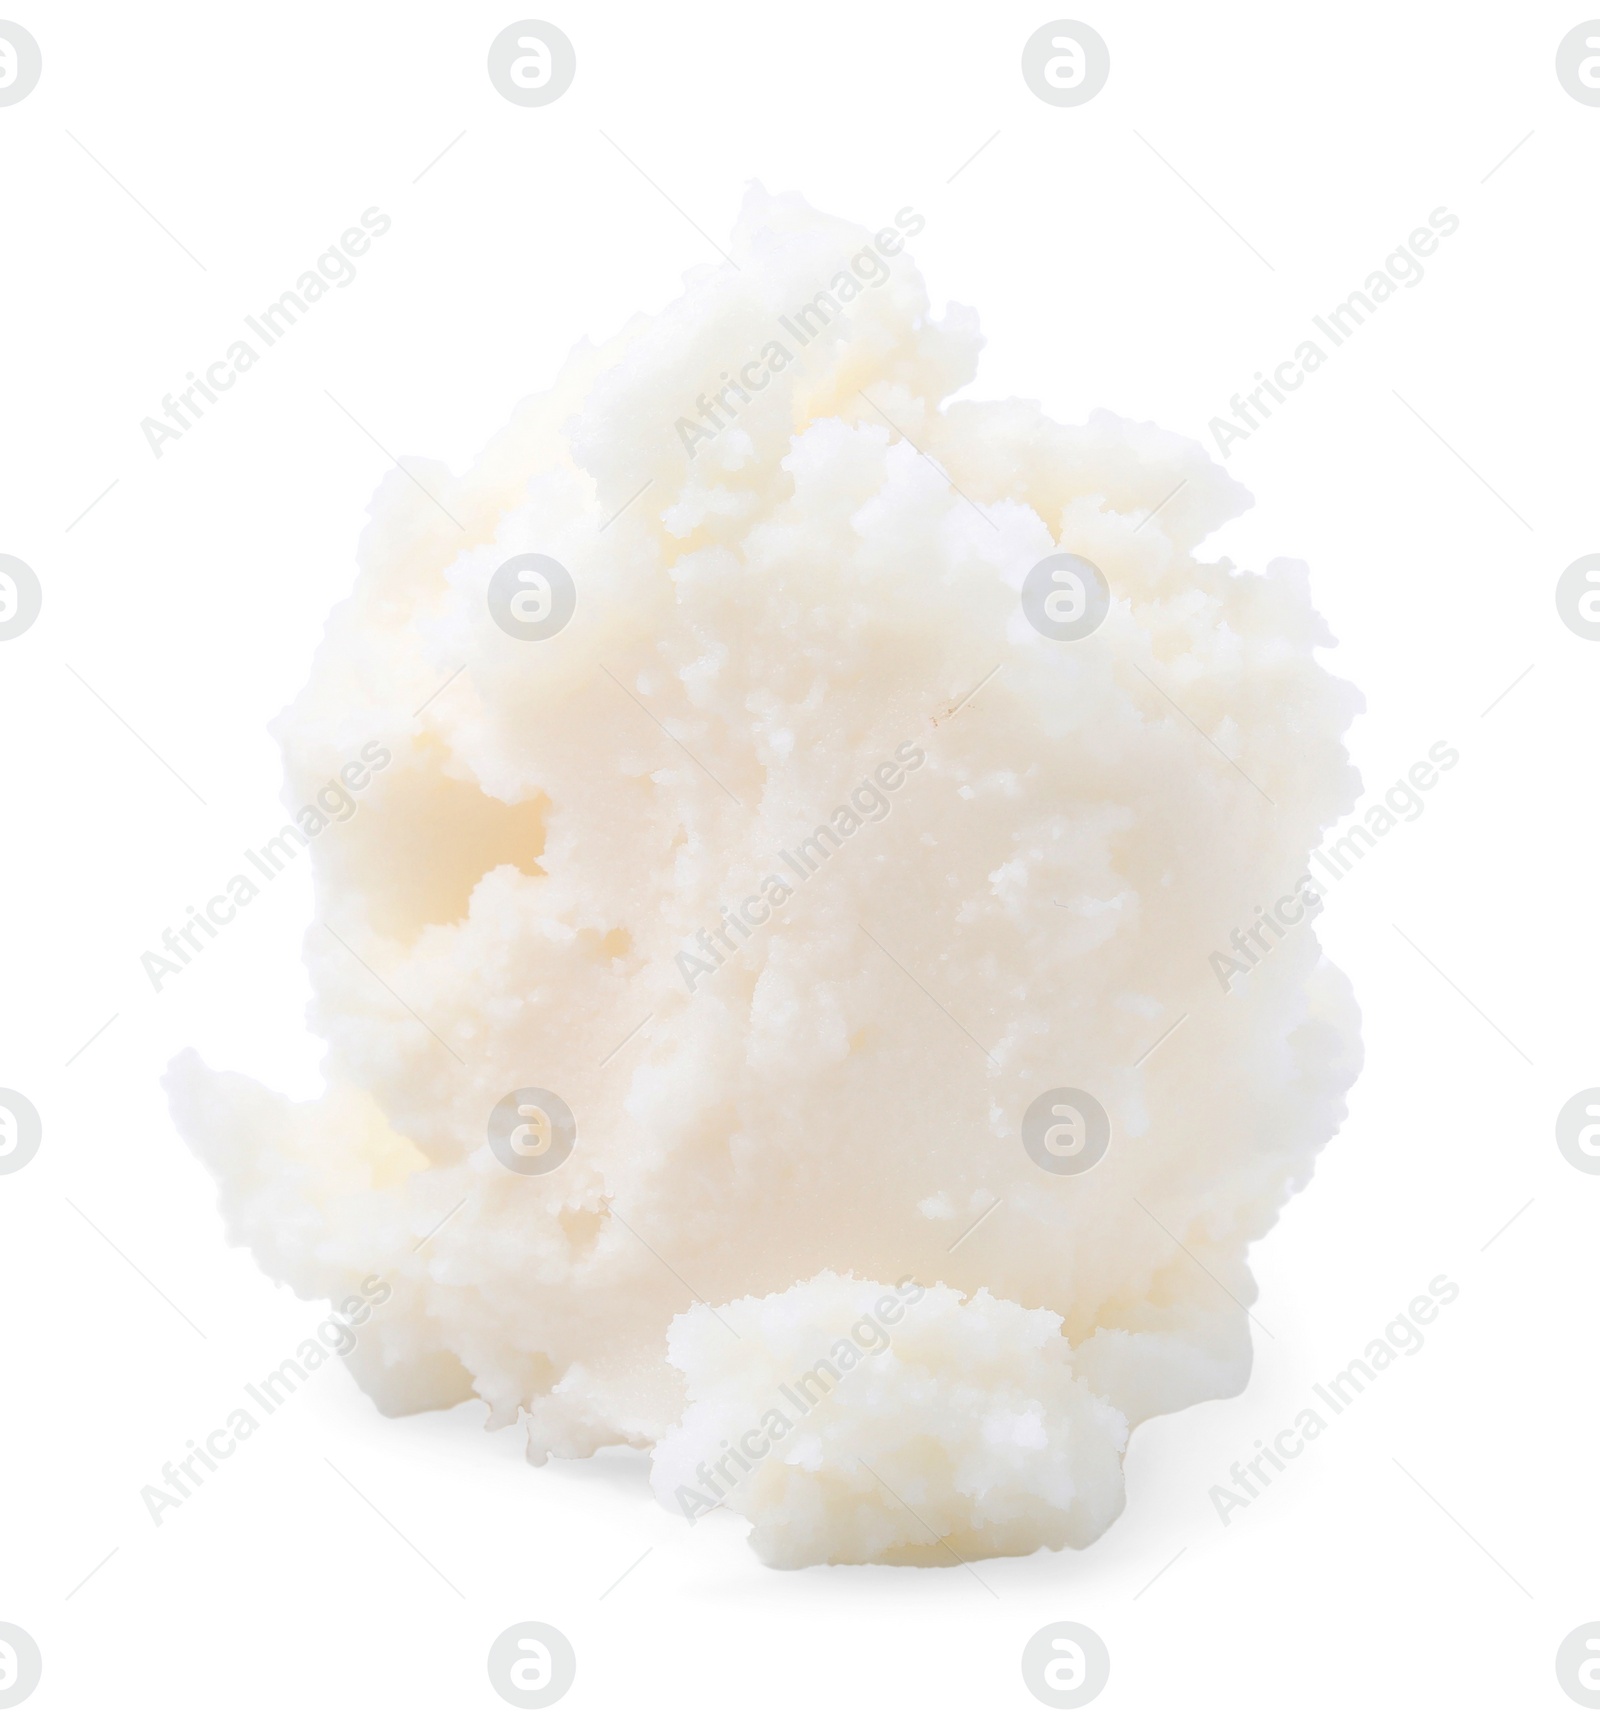 Photo of Delicious natural pork lard isolated on white